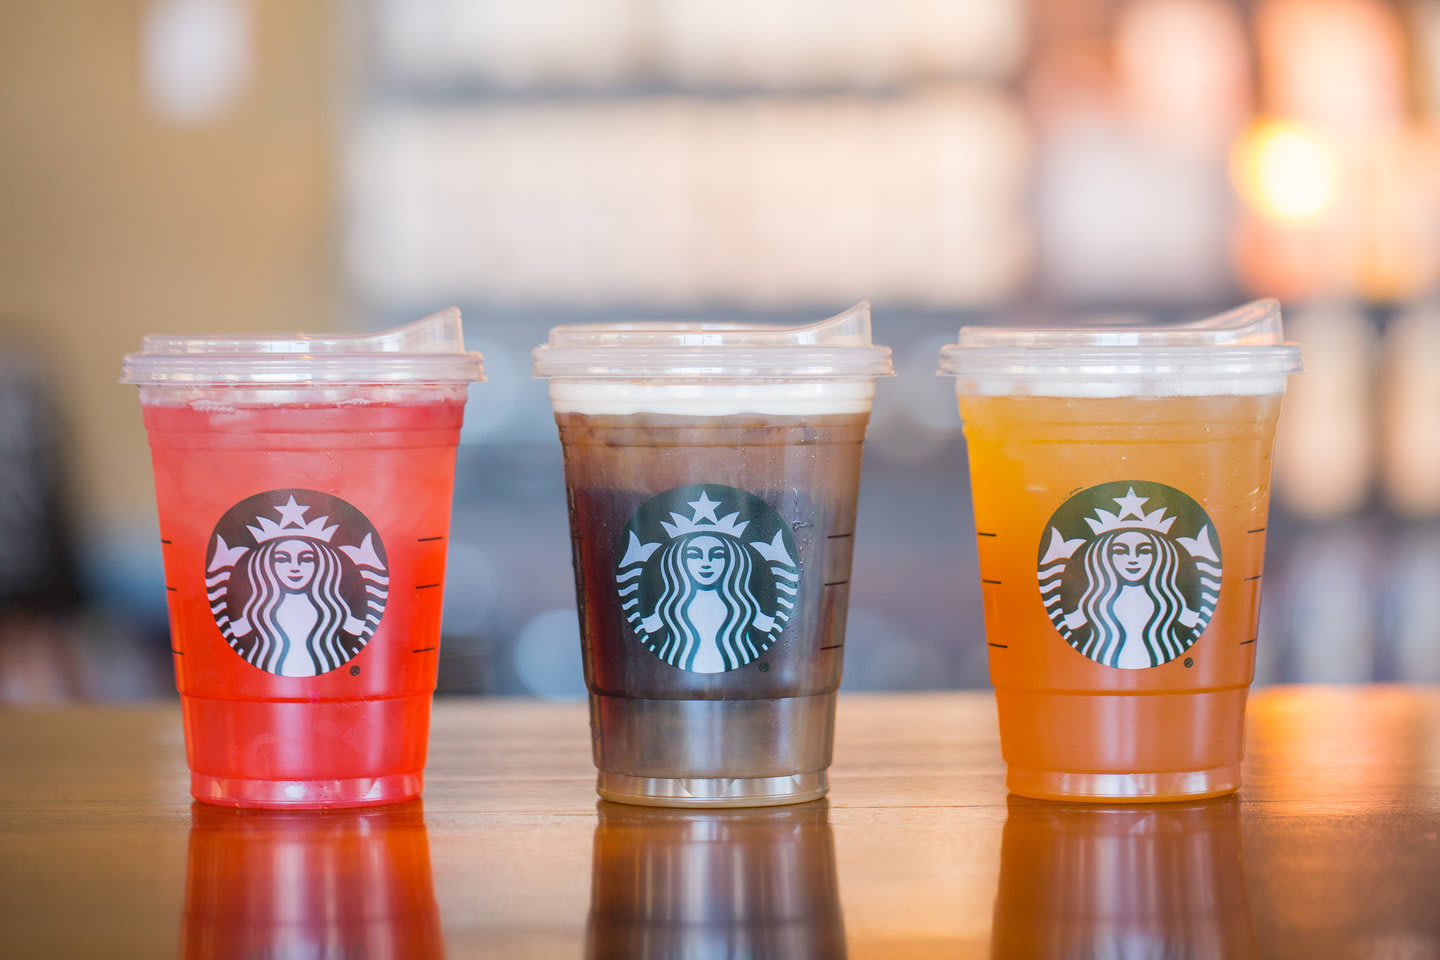 Starbucks plans to ban plastic straws from stores in more cities